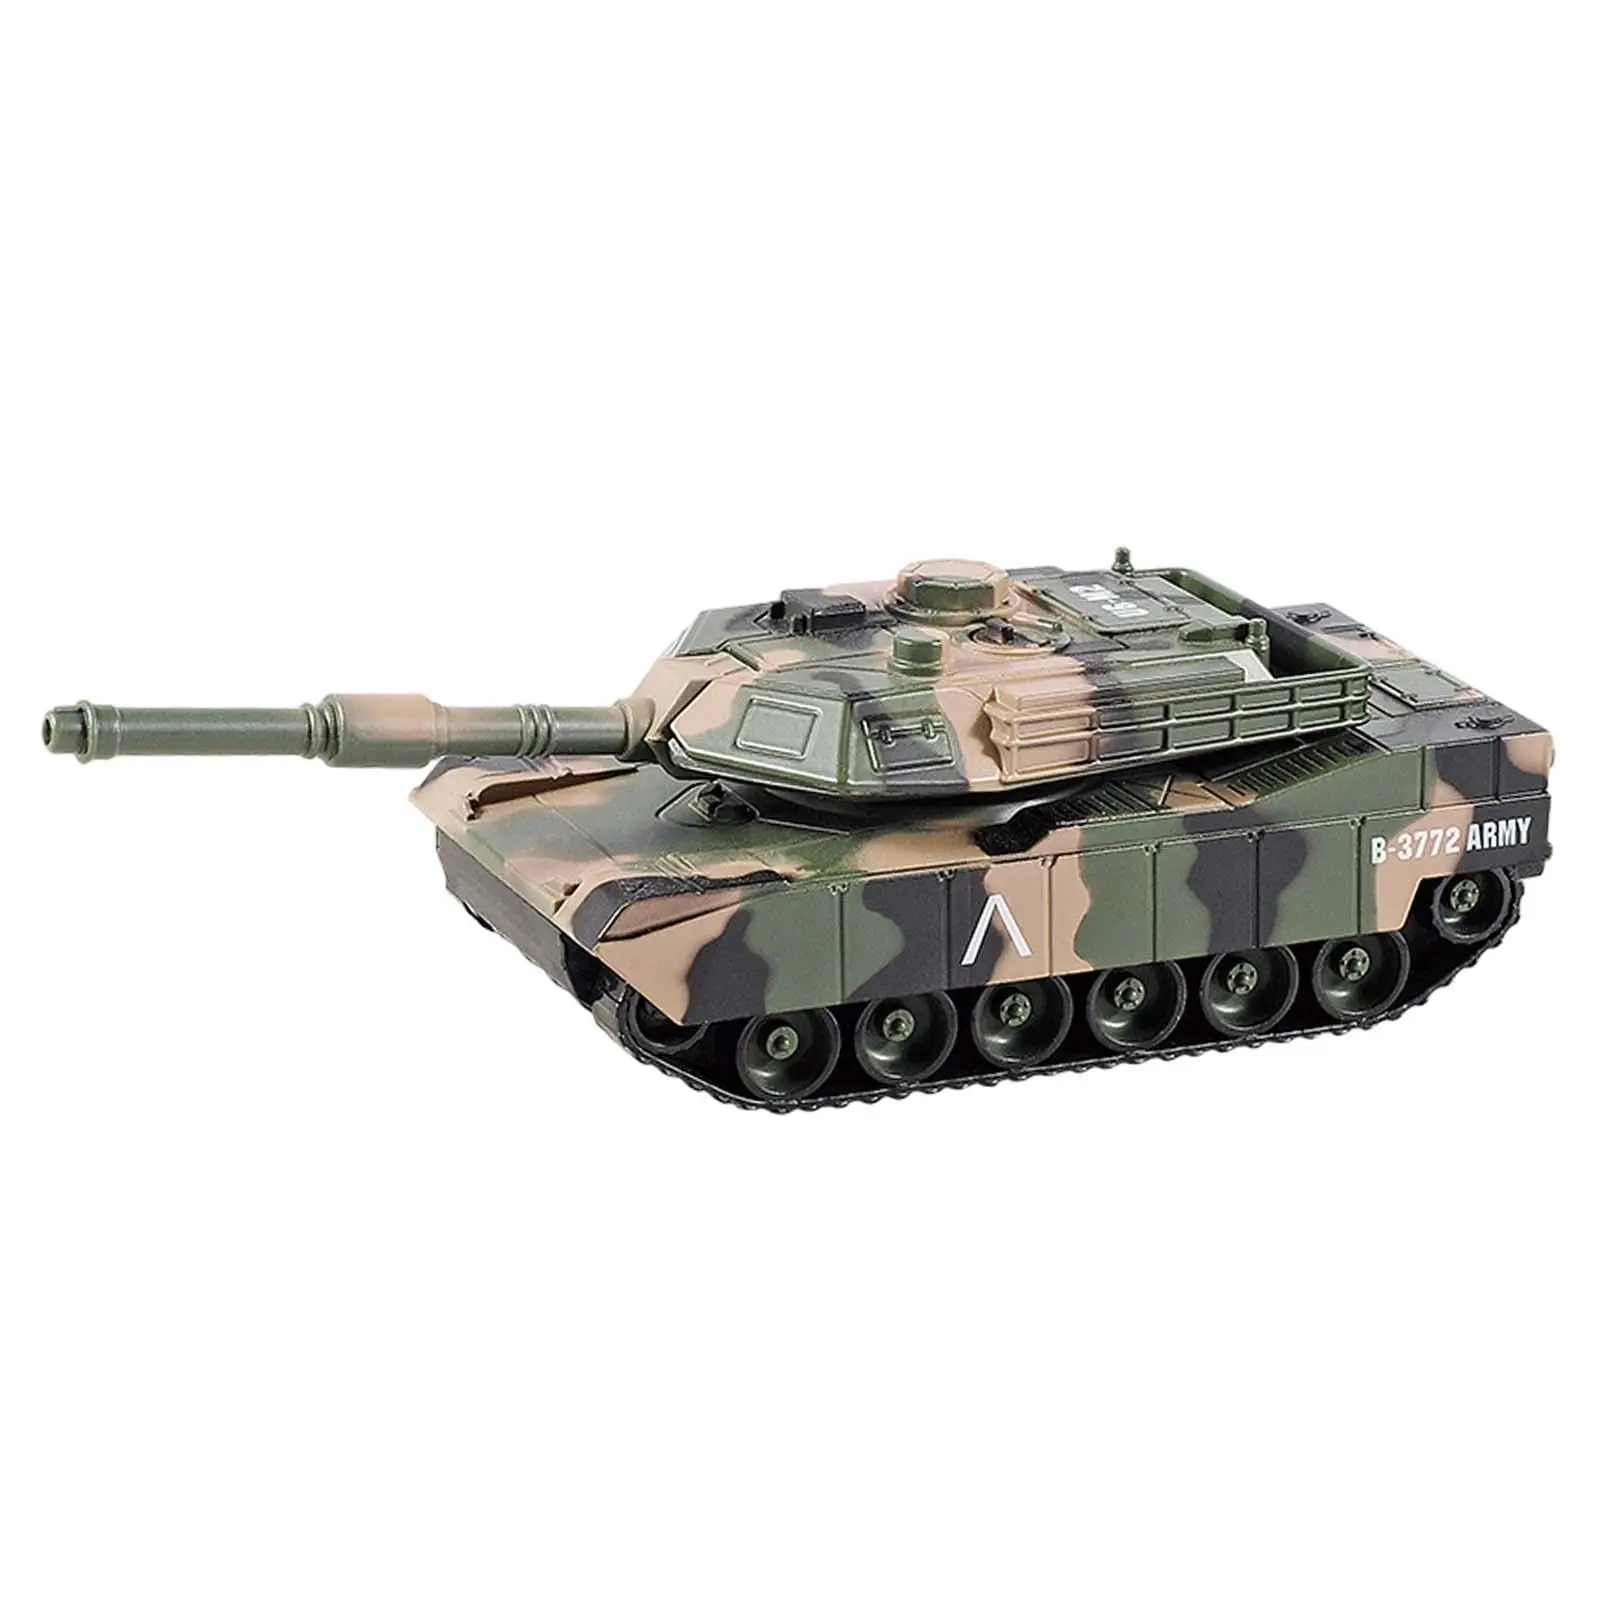 1/24 Tank Toy Educational Toys Vehicle Rotating Fort Creative Party Favors Realistic Vehicle for Girls Boys Kids Birthday Gift